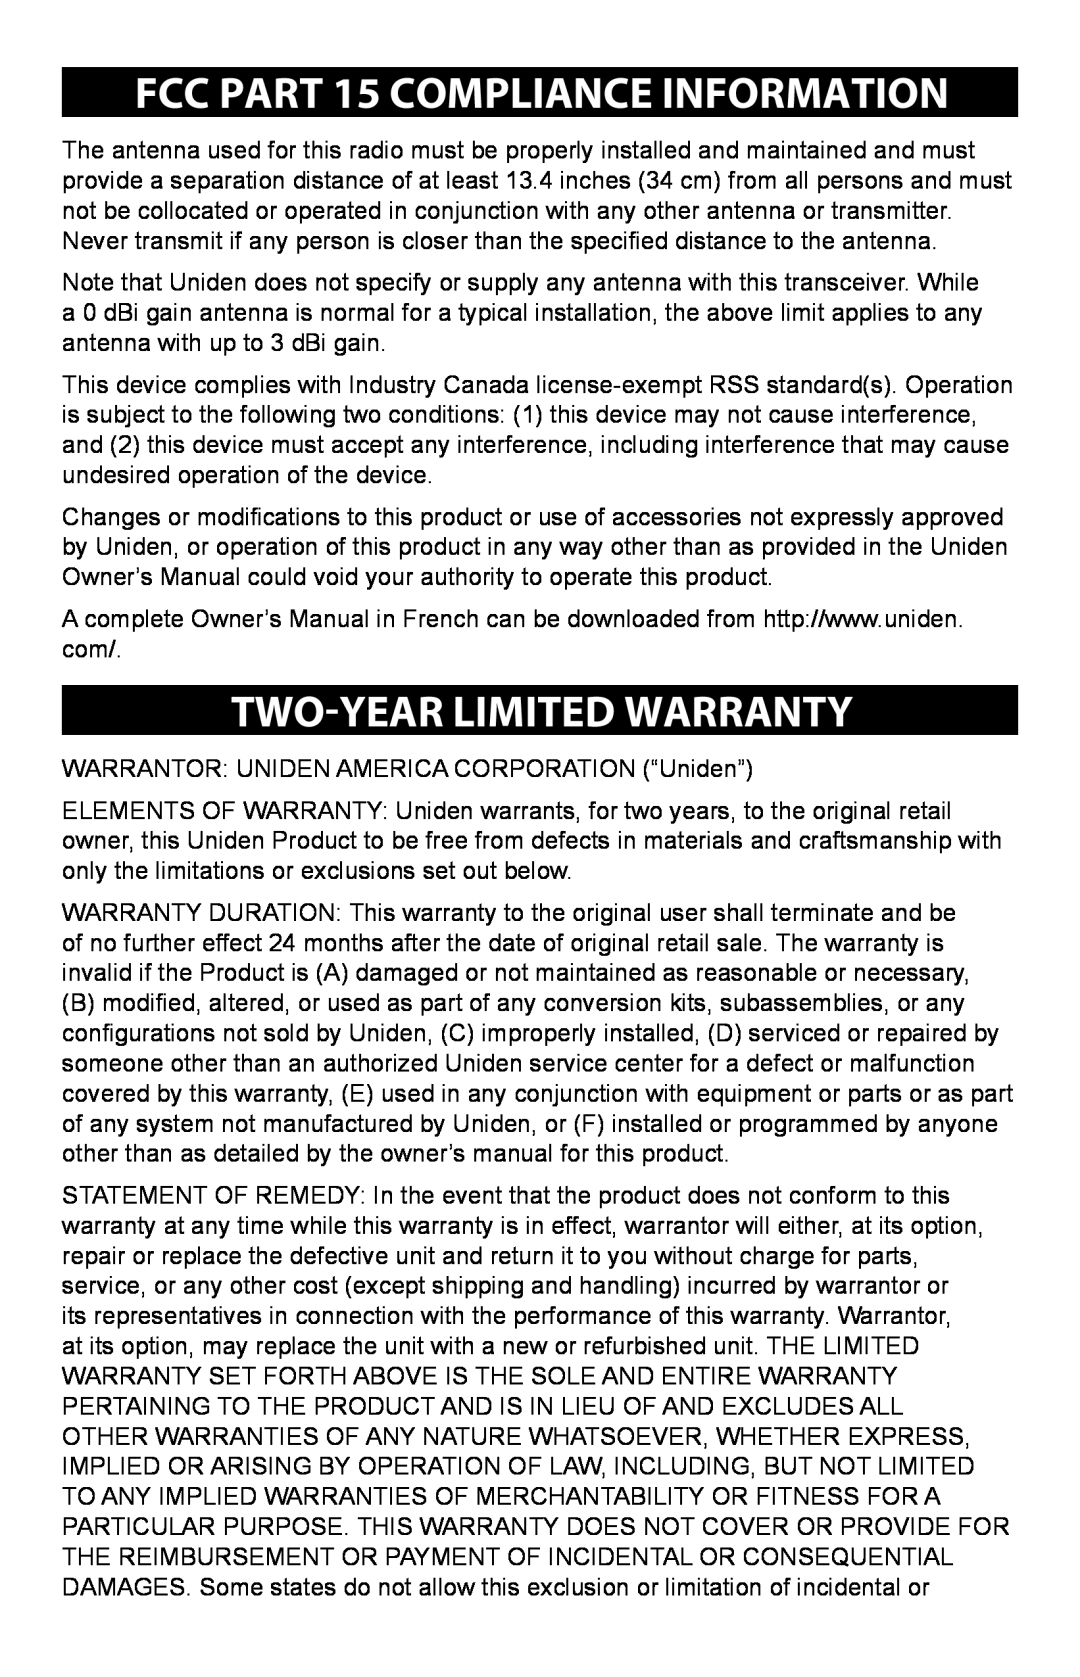 Uniden PRO 510XL manual FCC Part 15 Compliance Information, Two-Yearlimited Warranty 